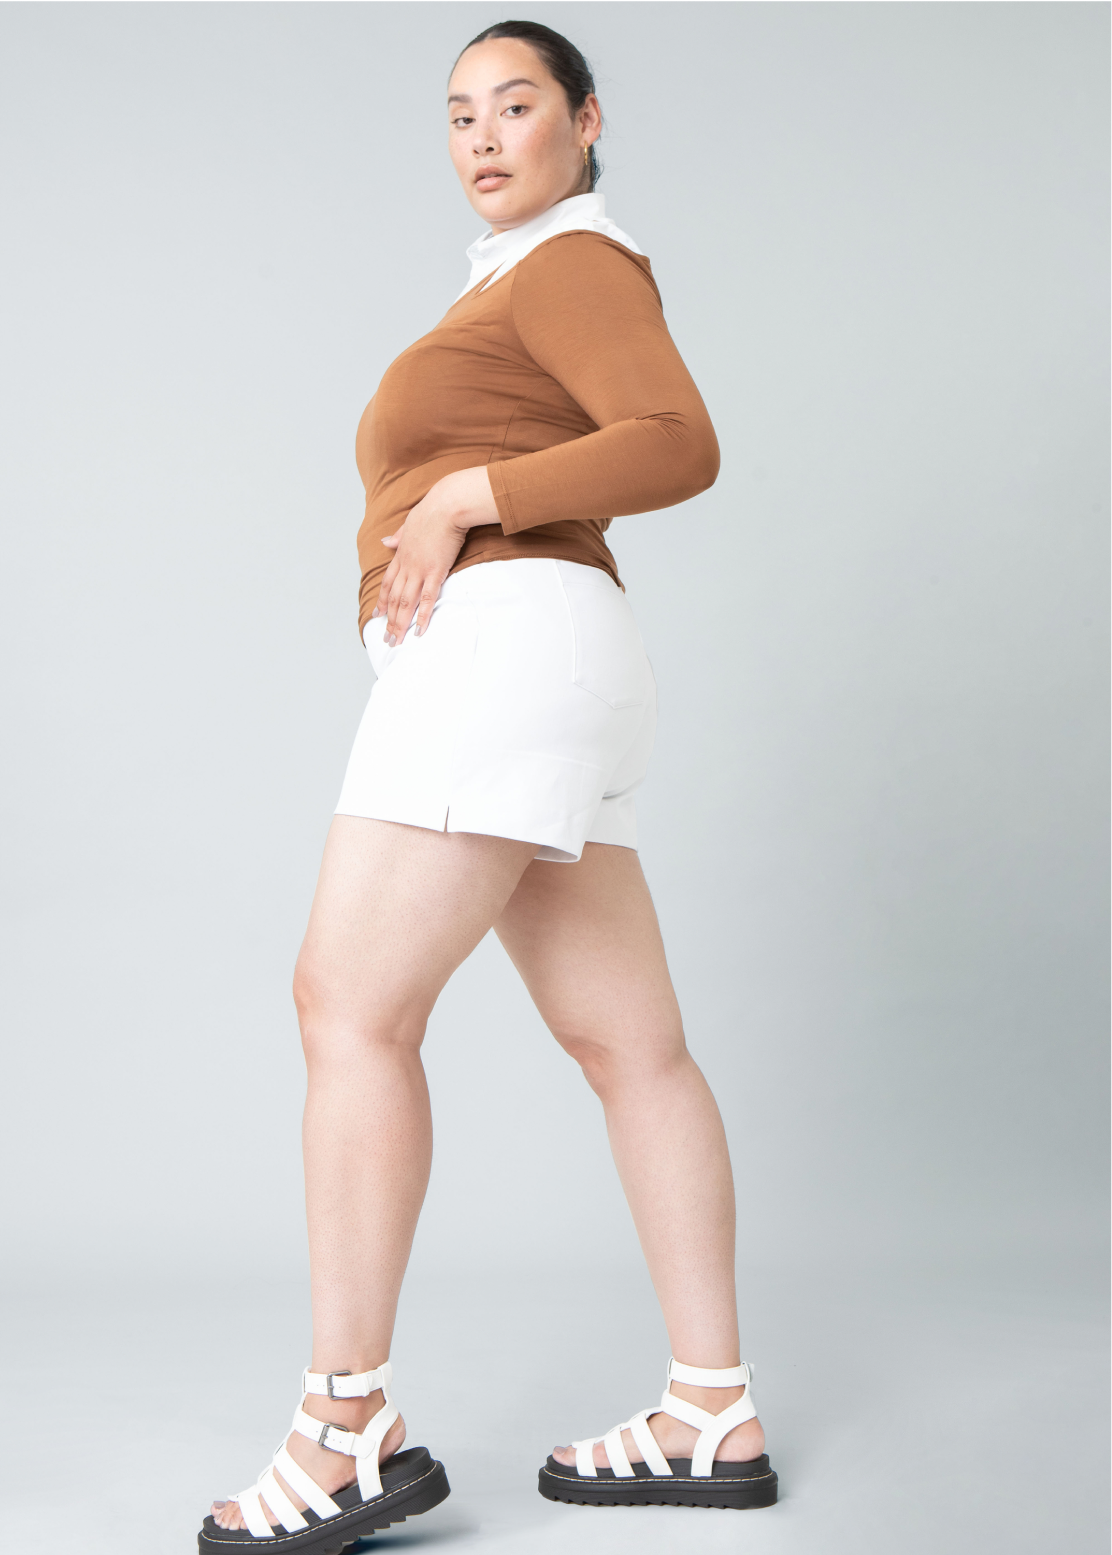 GUT  Spanx: The White Pants You Can Underthink